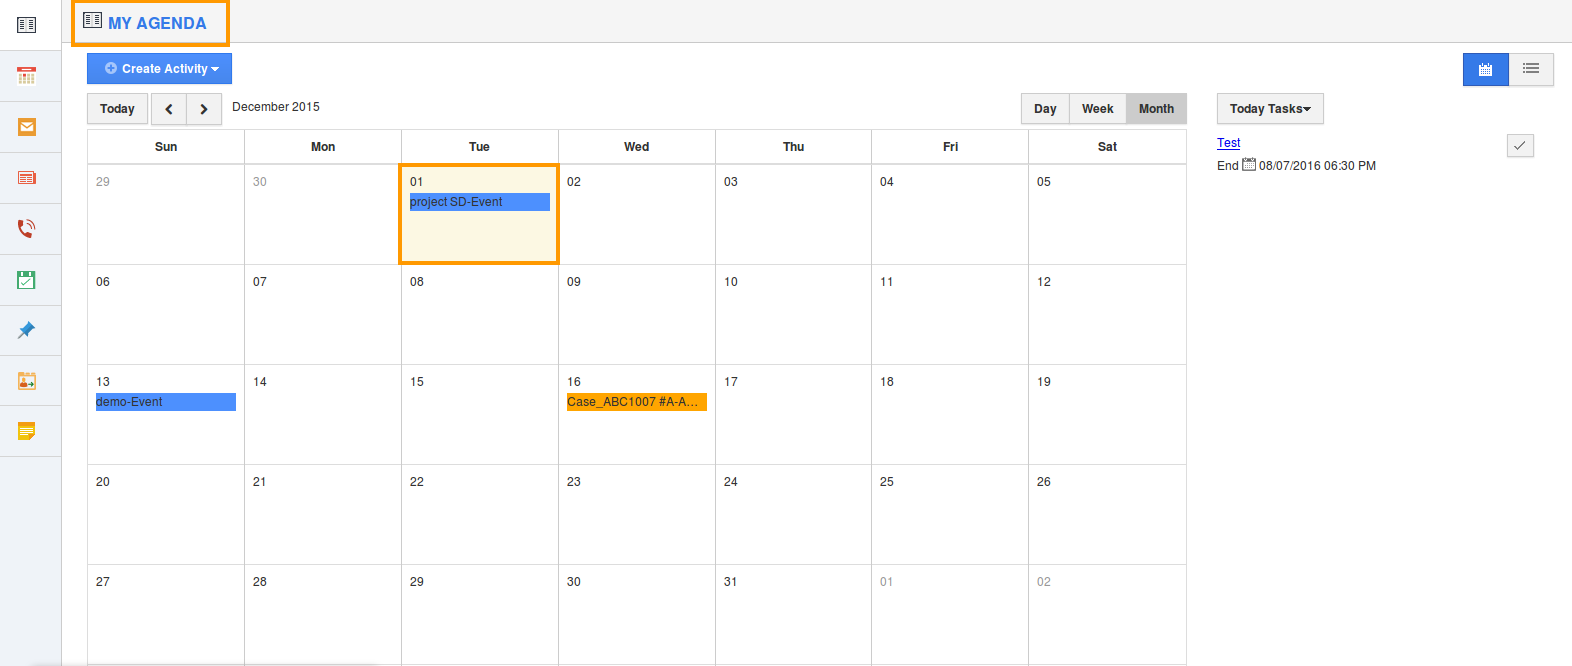 How do I View My Agenda in Calendar View and List View? Apptivo FAQ